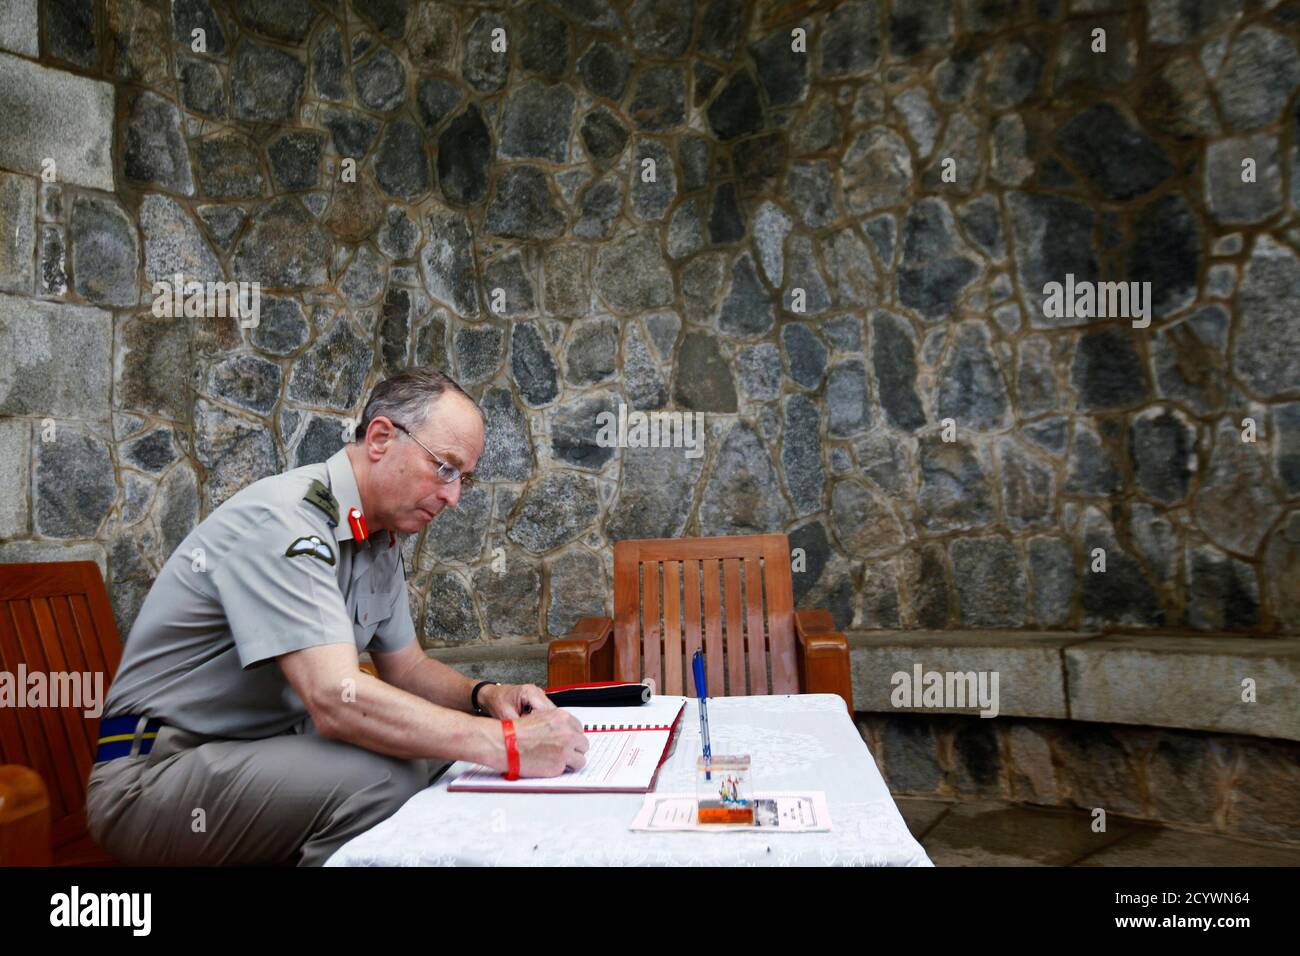 Britain's Chief of Defence Staff, General David Richards, signs the guest book during a visit to Taukkyan war cemetery, on the outskirts of Yangon, June 4, 2013. The cemetery is a memorial to Commonwealth soldiers who died in Burma, presently known as Myanmar, during World War Two. REUTERS/Minzayar (MYANMAR - Tags: MILITARY POLITICS CONFLICT) Stock Photo